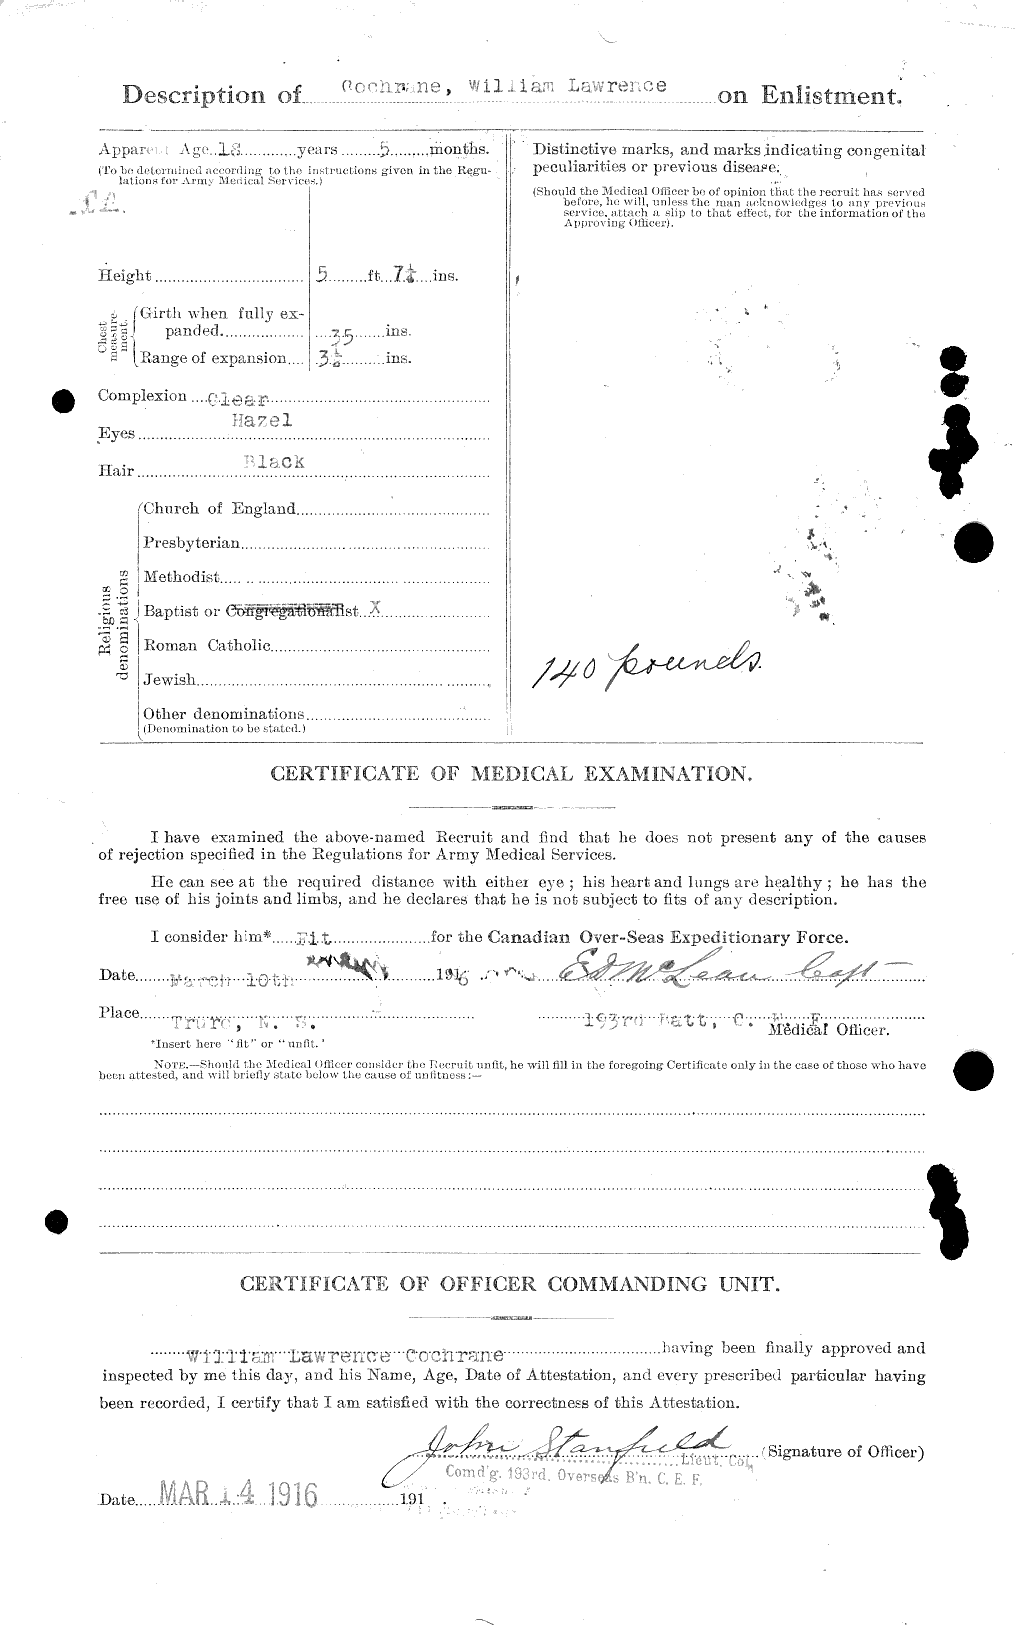 Personnel Records of the First World War - CEF 026511b